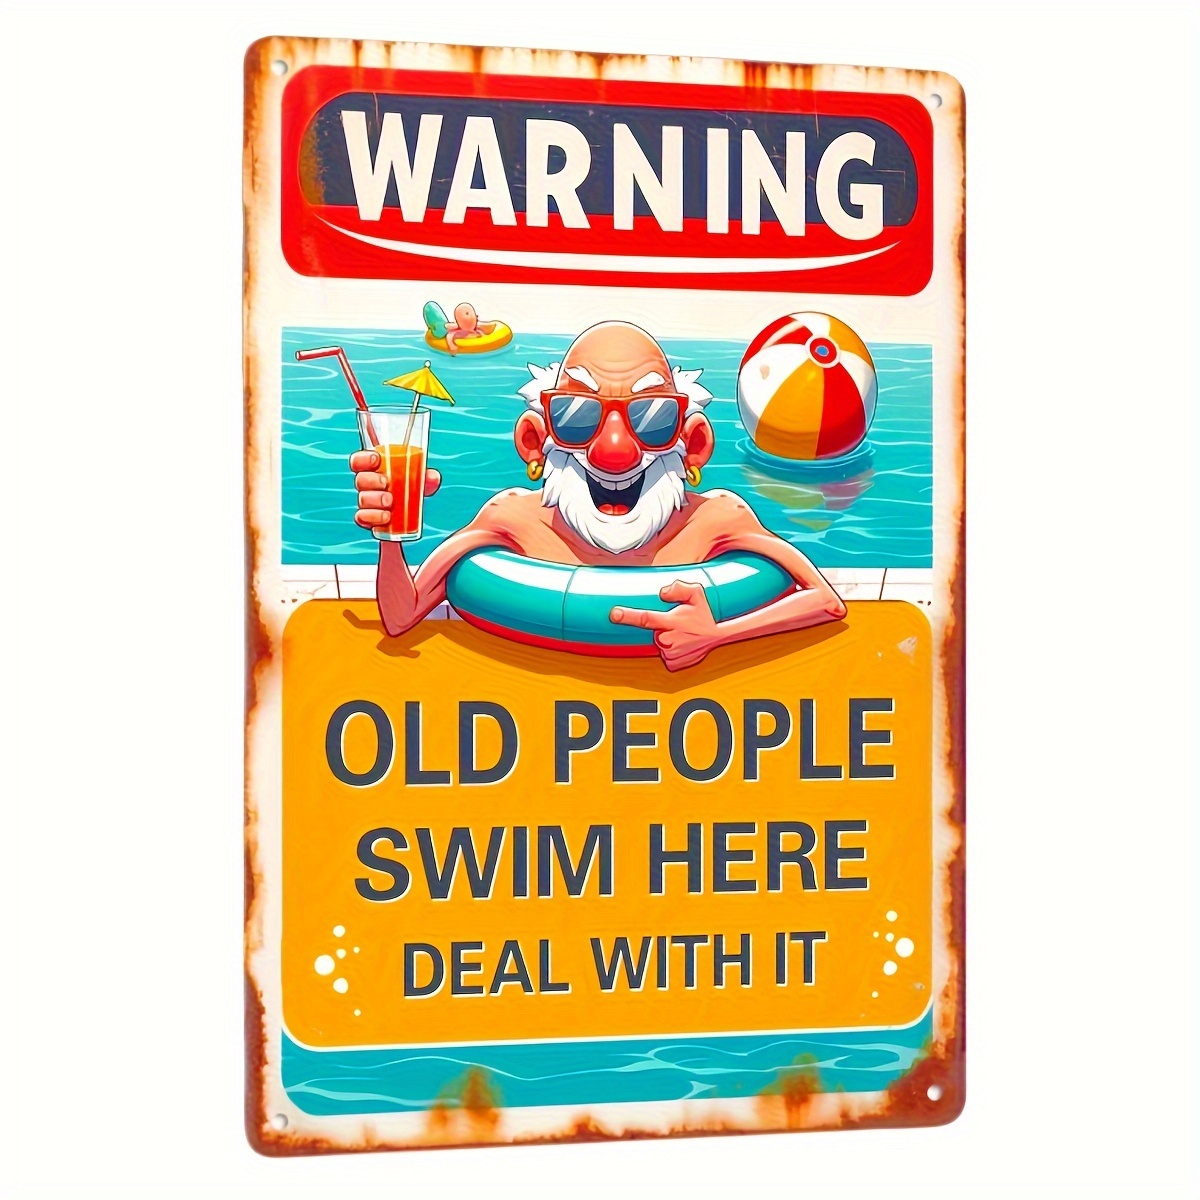 

Vintage Style Metal Warning Sign "old People Swim Here" - Decorative Wall Hanging Tin Plaque For Farmhouse, Home, Pool Area, Indoor/outdoor Use - No Electricity Needed, Rustic 1pc (12x8 Inches)